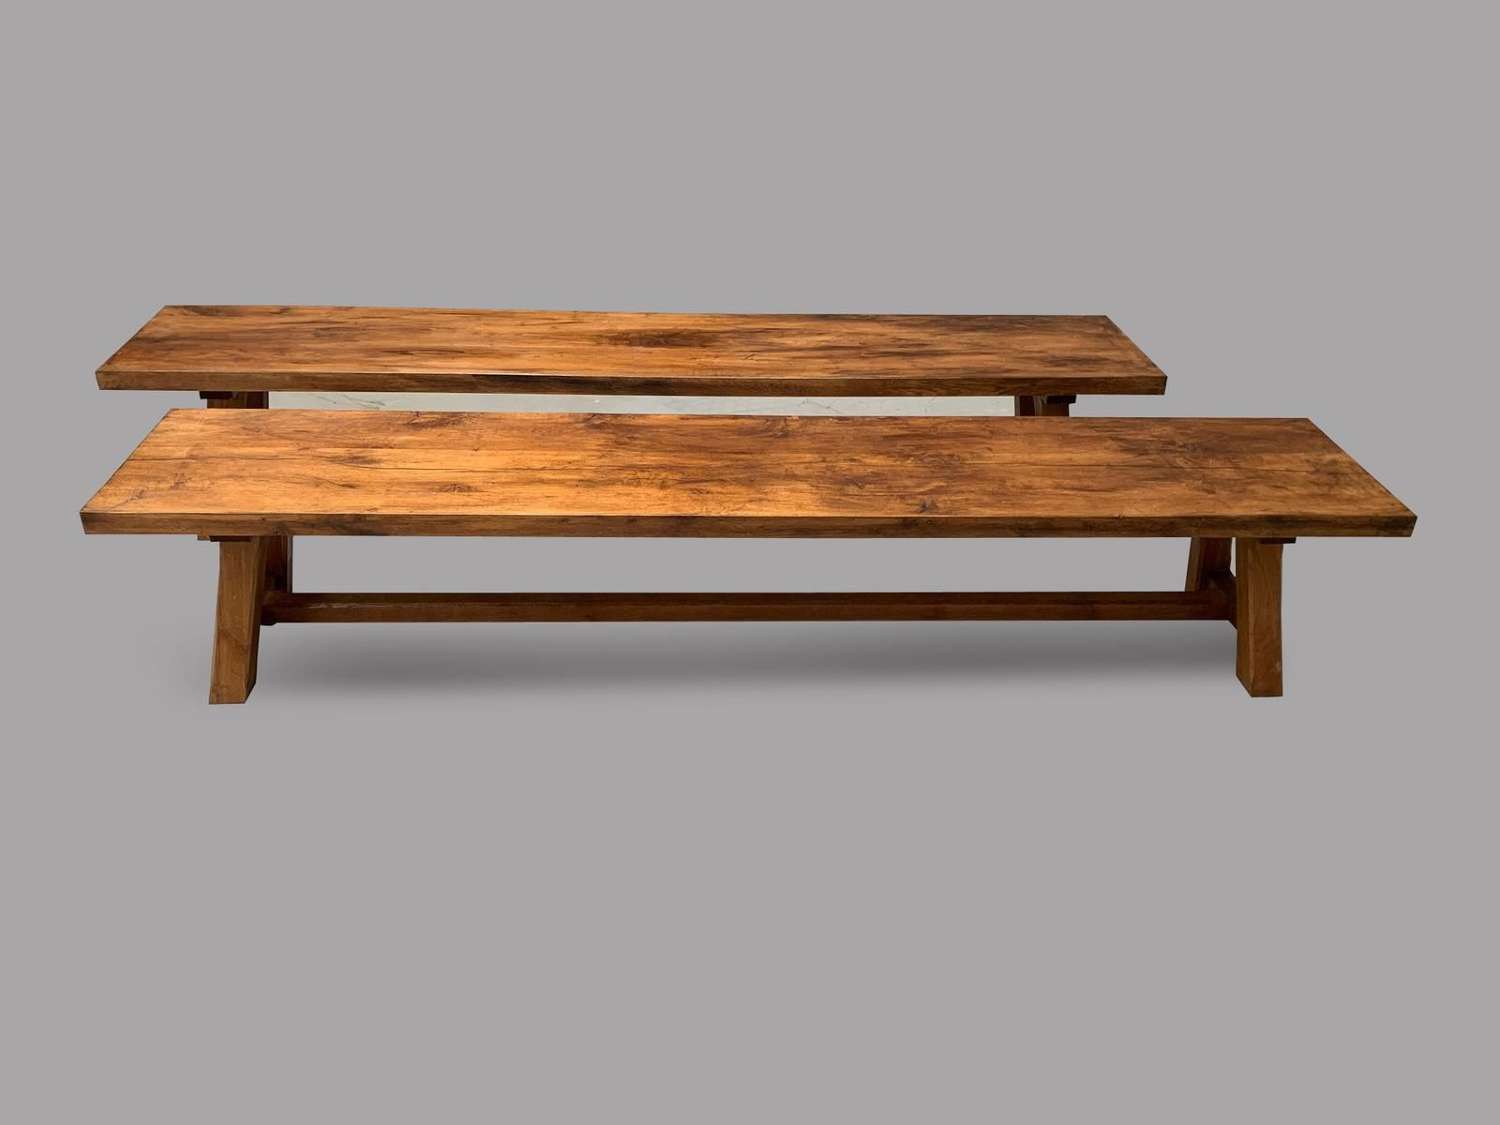 A Pair of Heavy Oak Benches